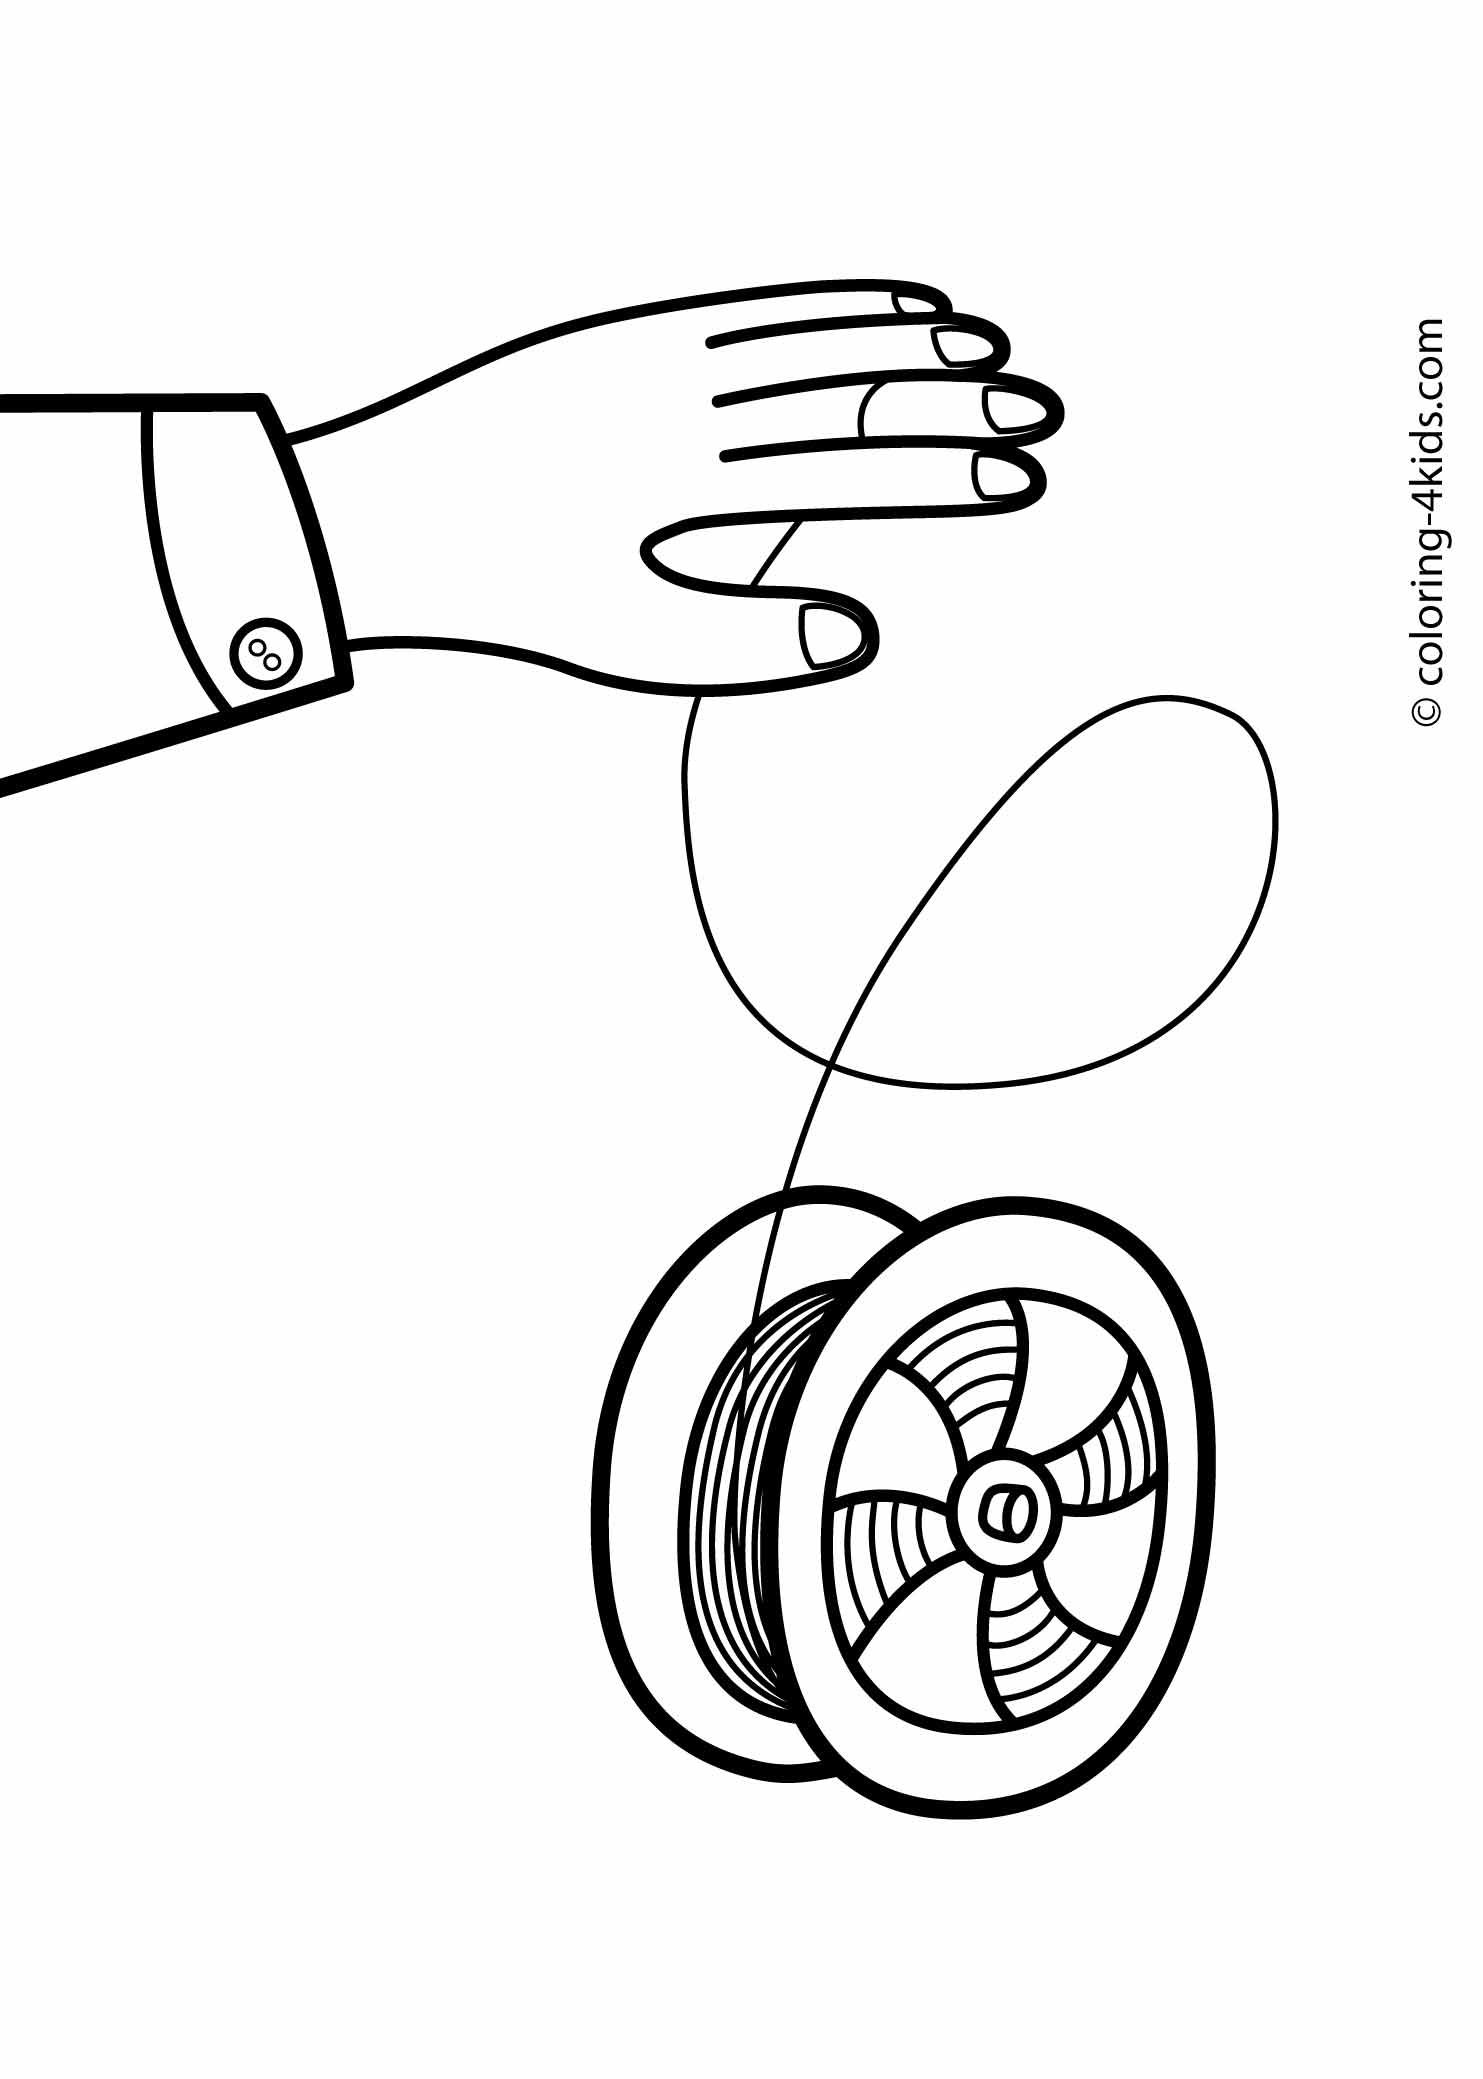 Yo-yo coloring pages for kids, printable drawing | Coloring pages ...